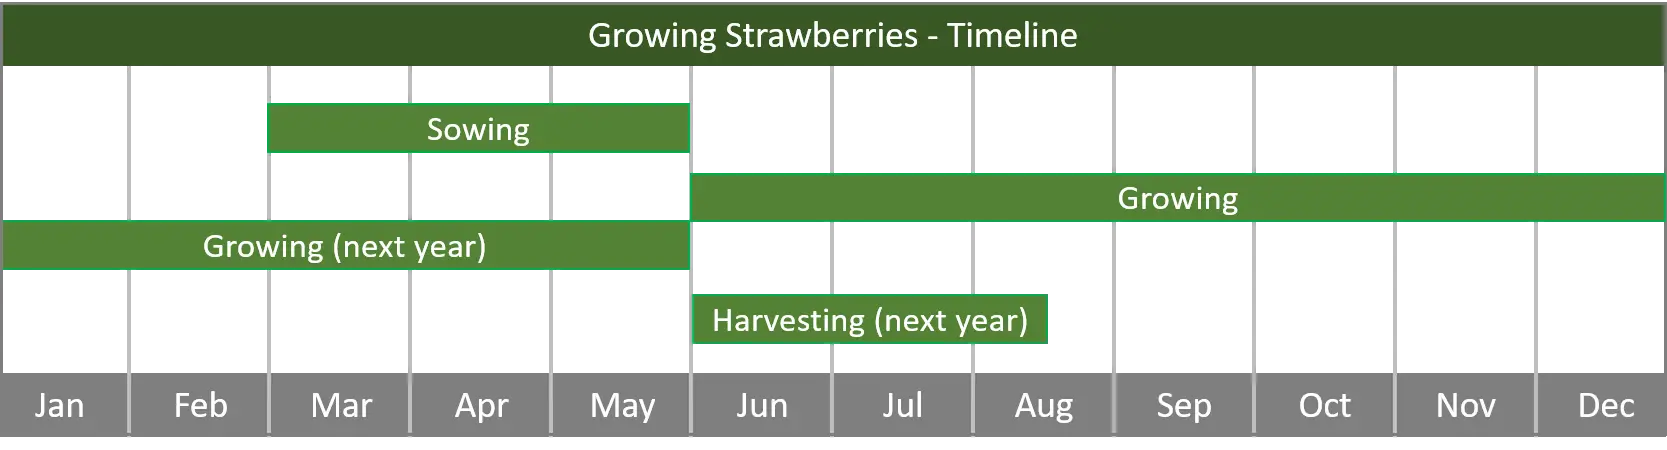 how to grow strawberries from seed to harvest - timeline